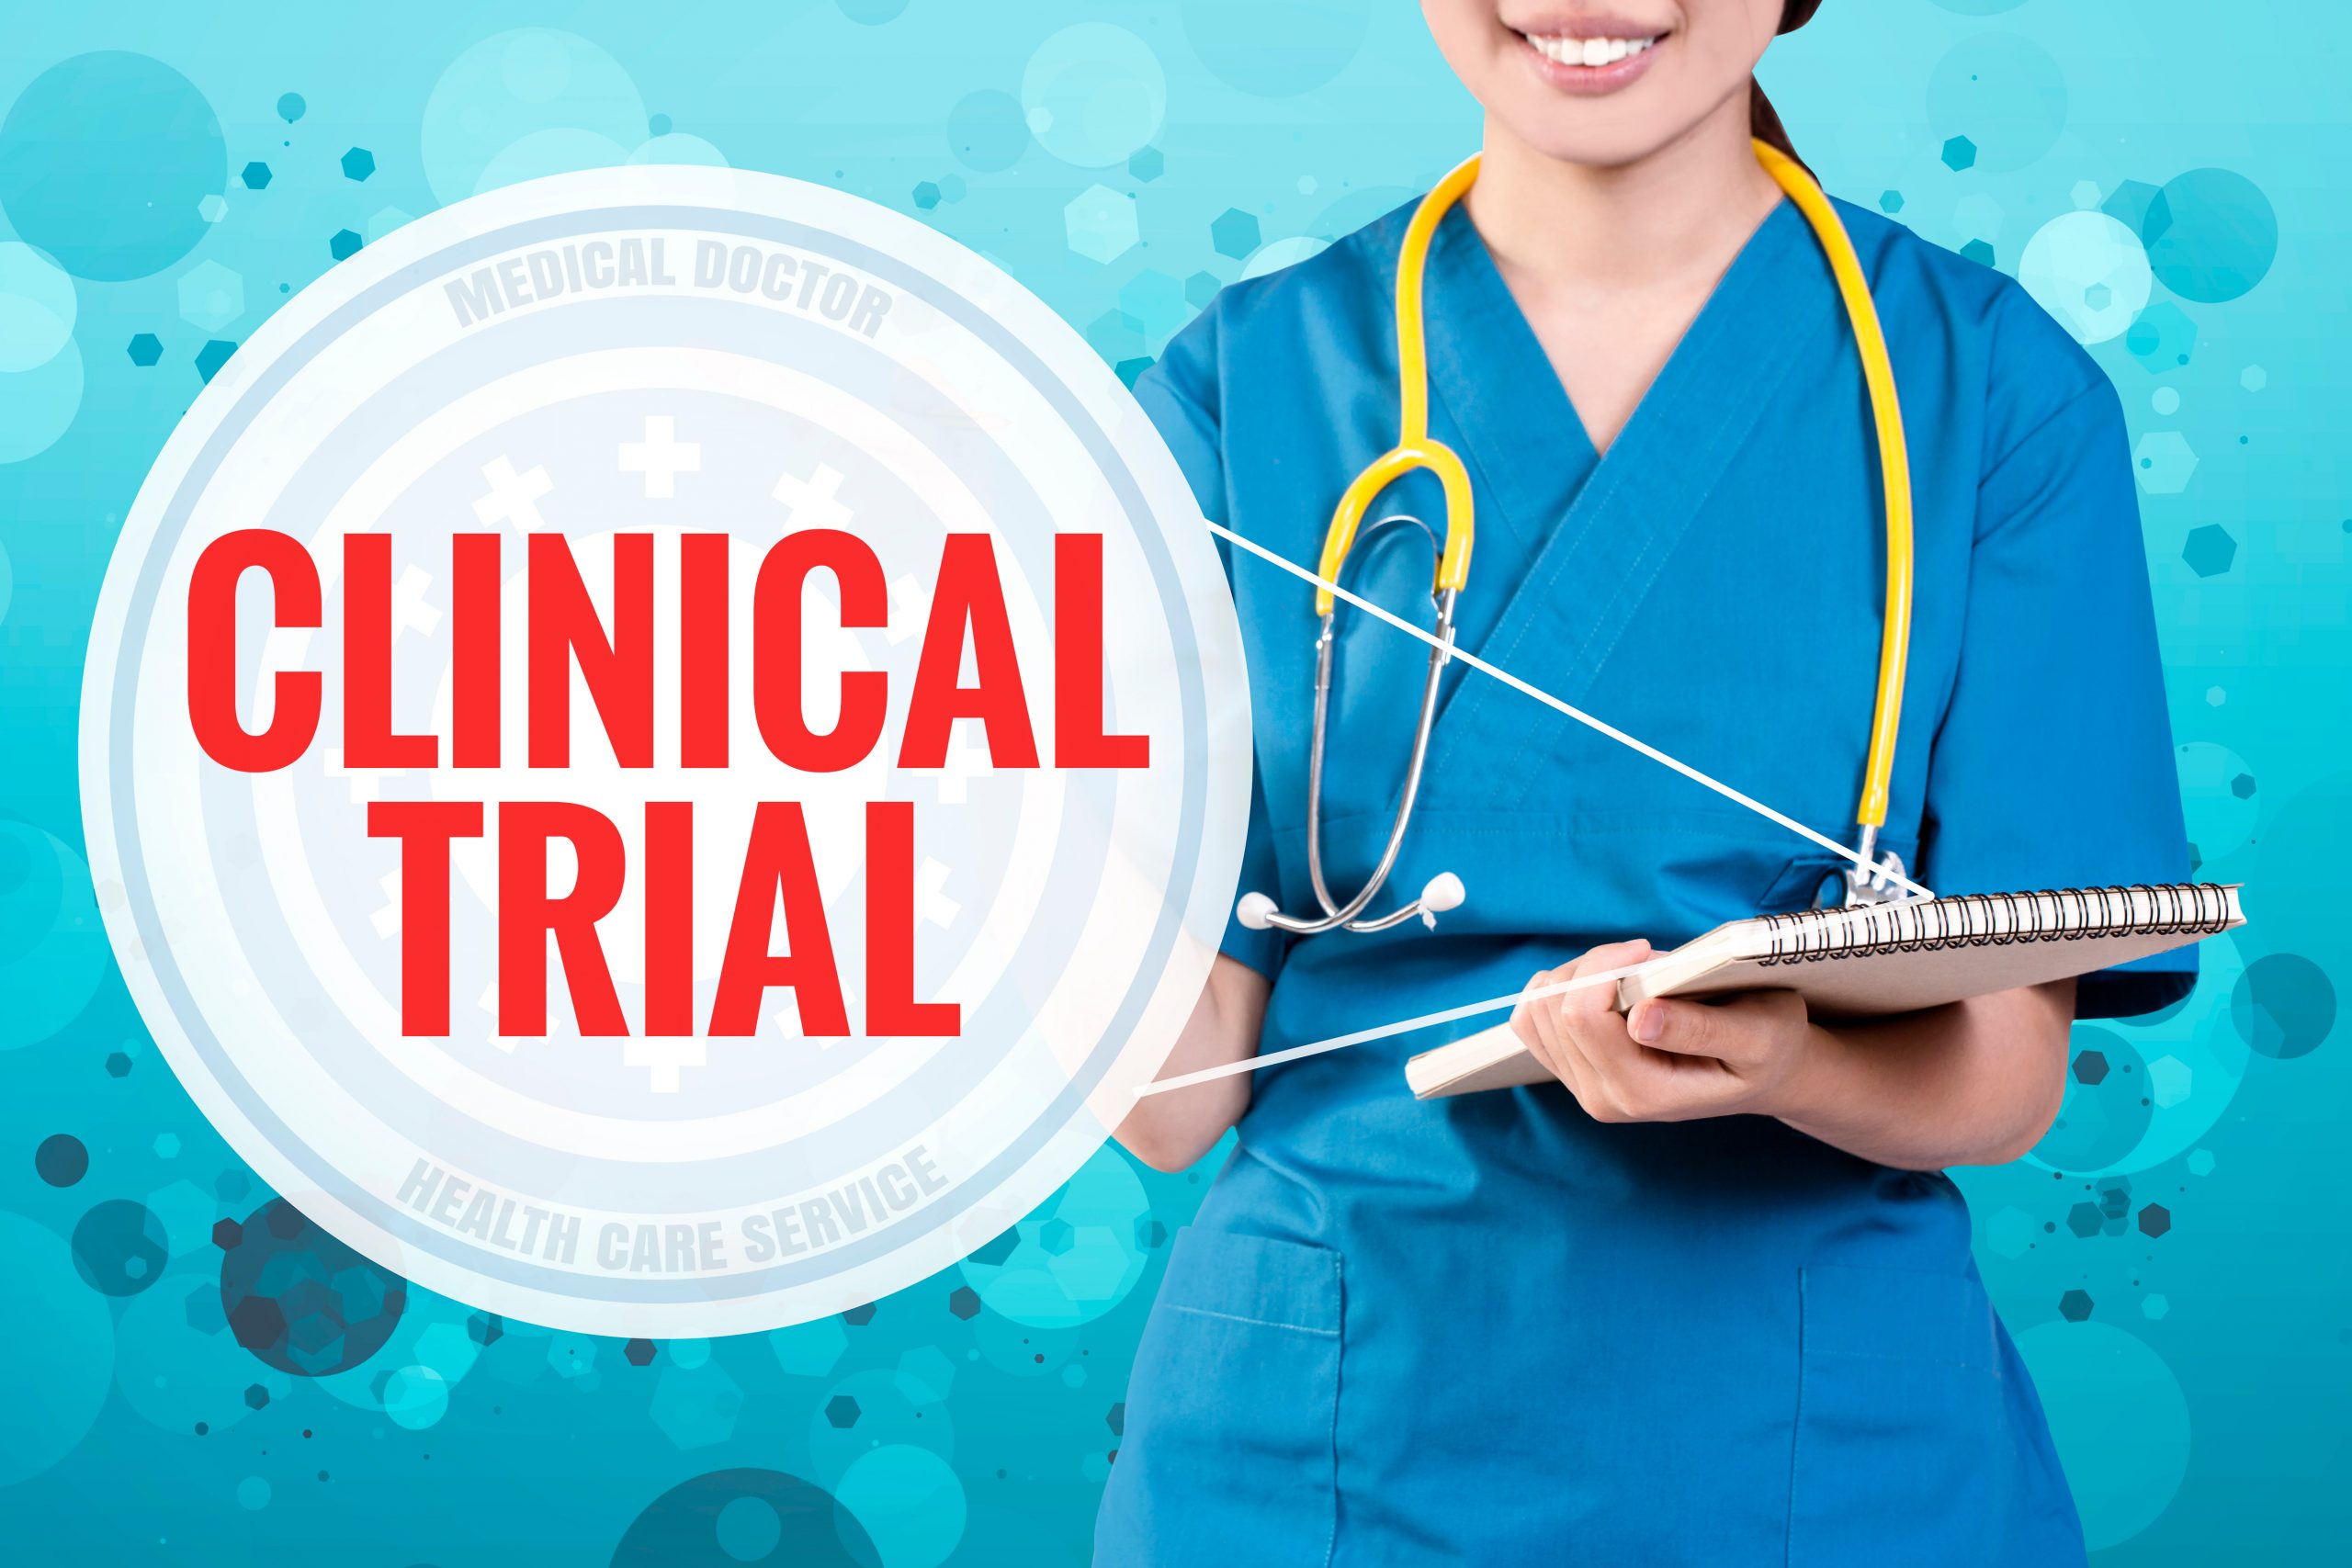 FIC Comments on Clinical Trials